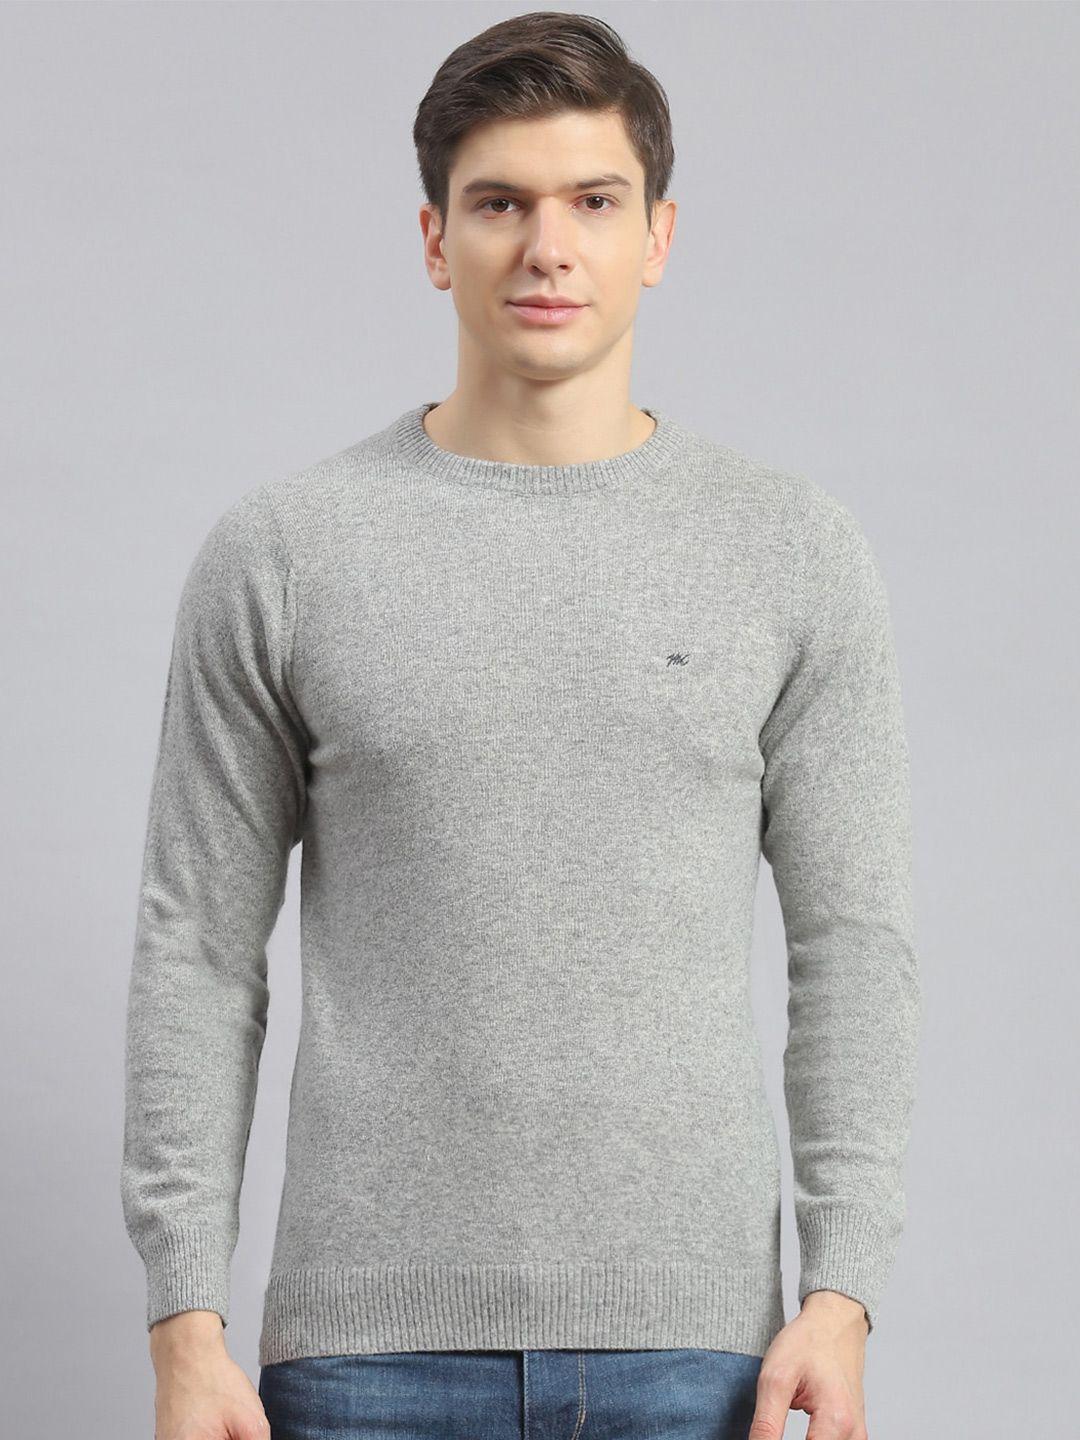 monte-carlo-round-neck-woollen-pullover-ribbed-sweaters